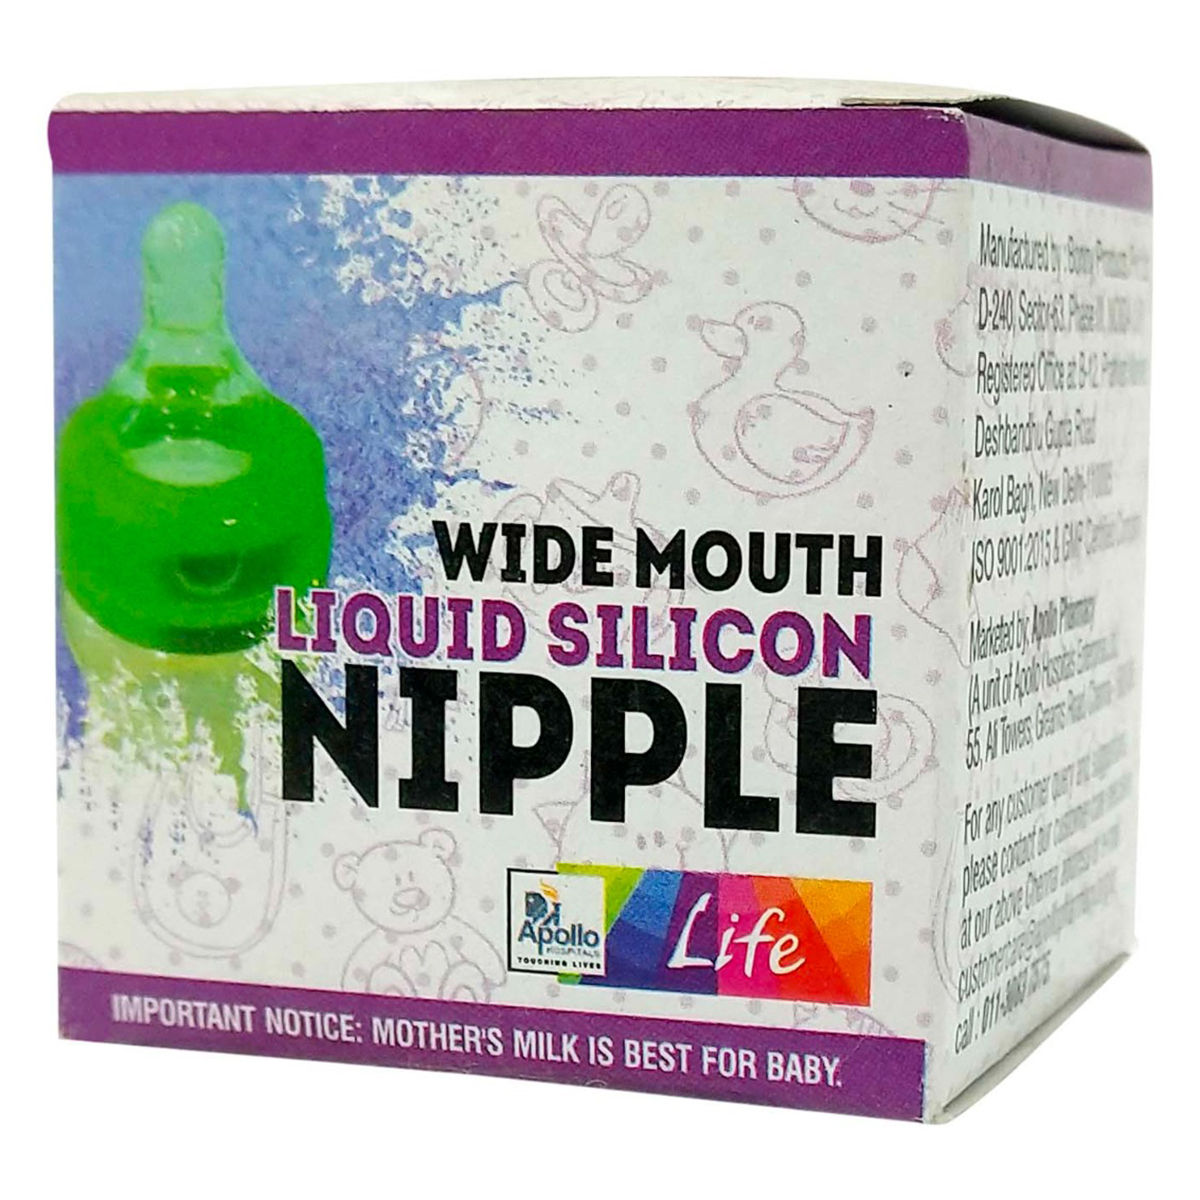 Buy Apollo Life Wide Mouth Liquid Silicone Nipple, 1 Count Online